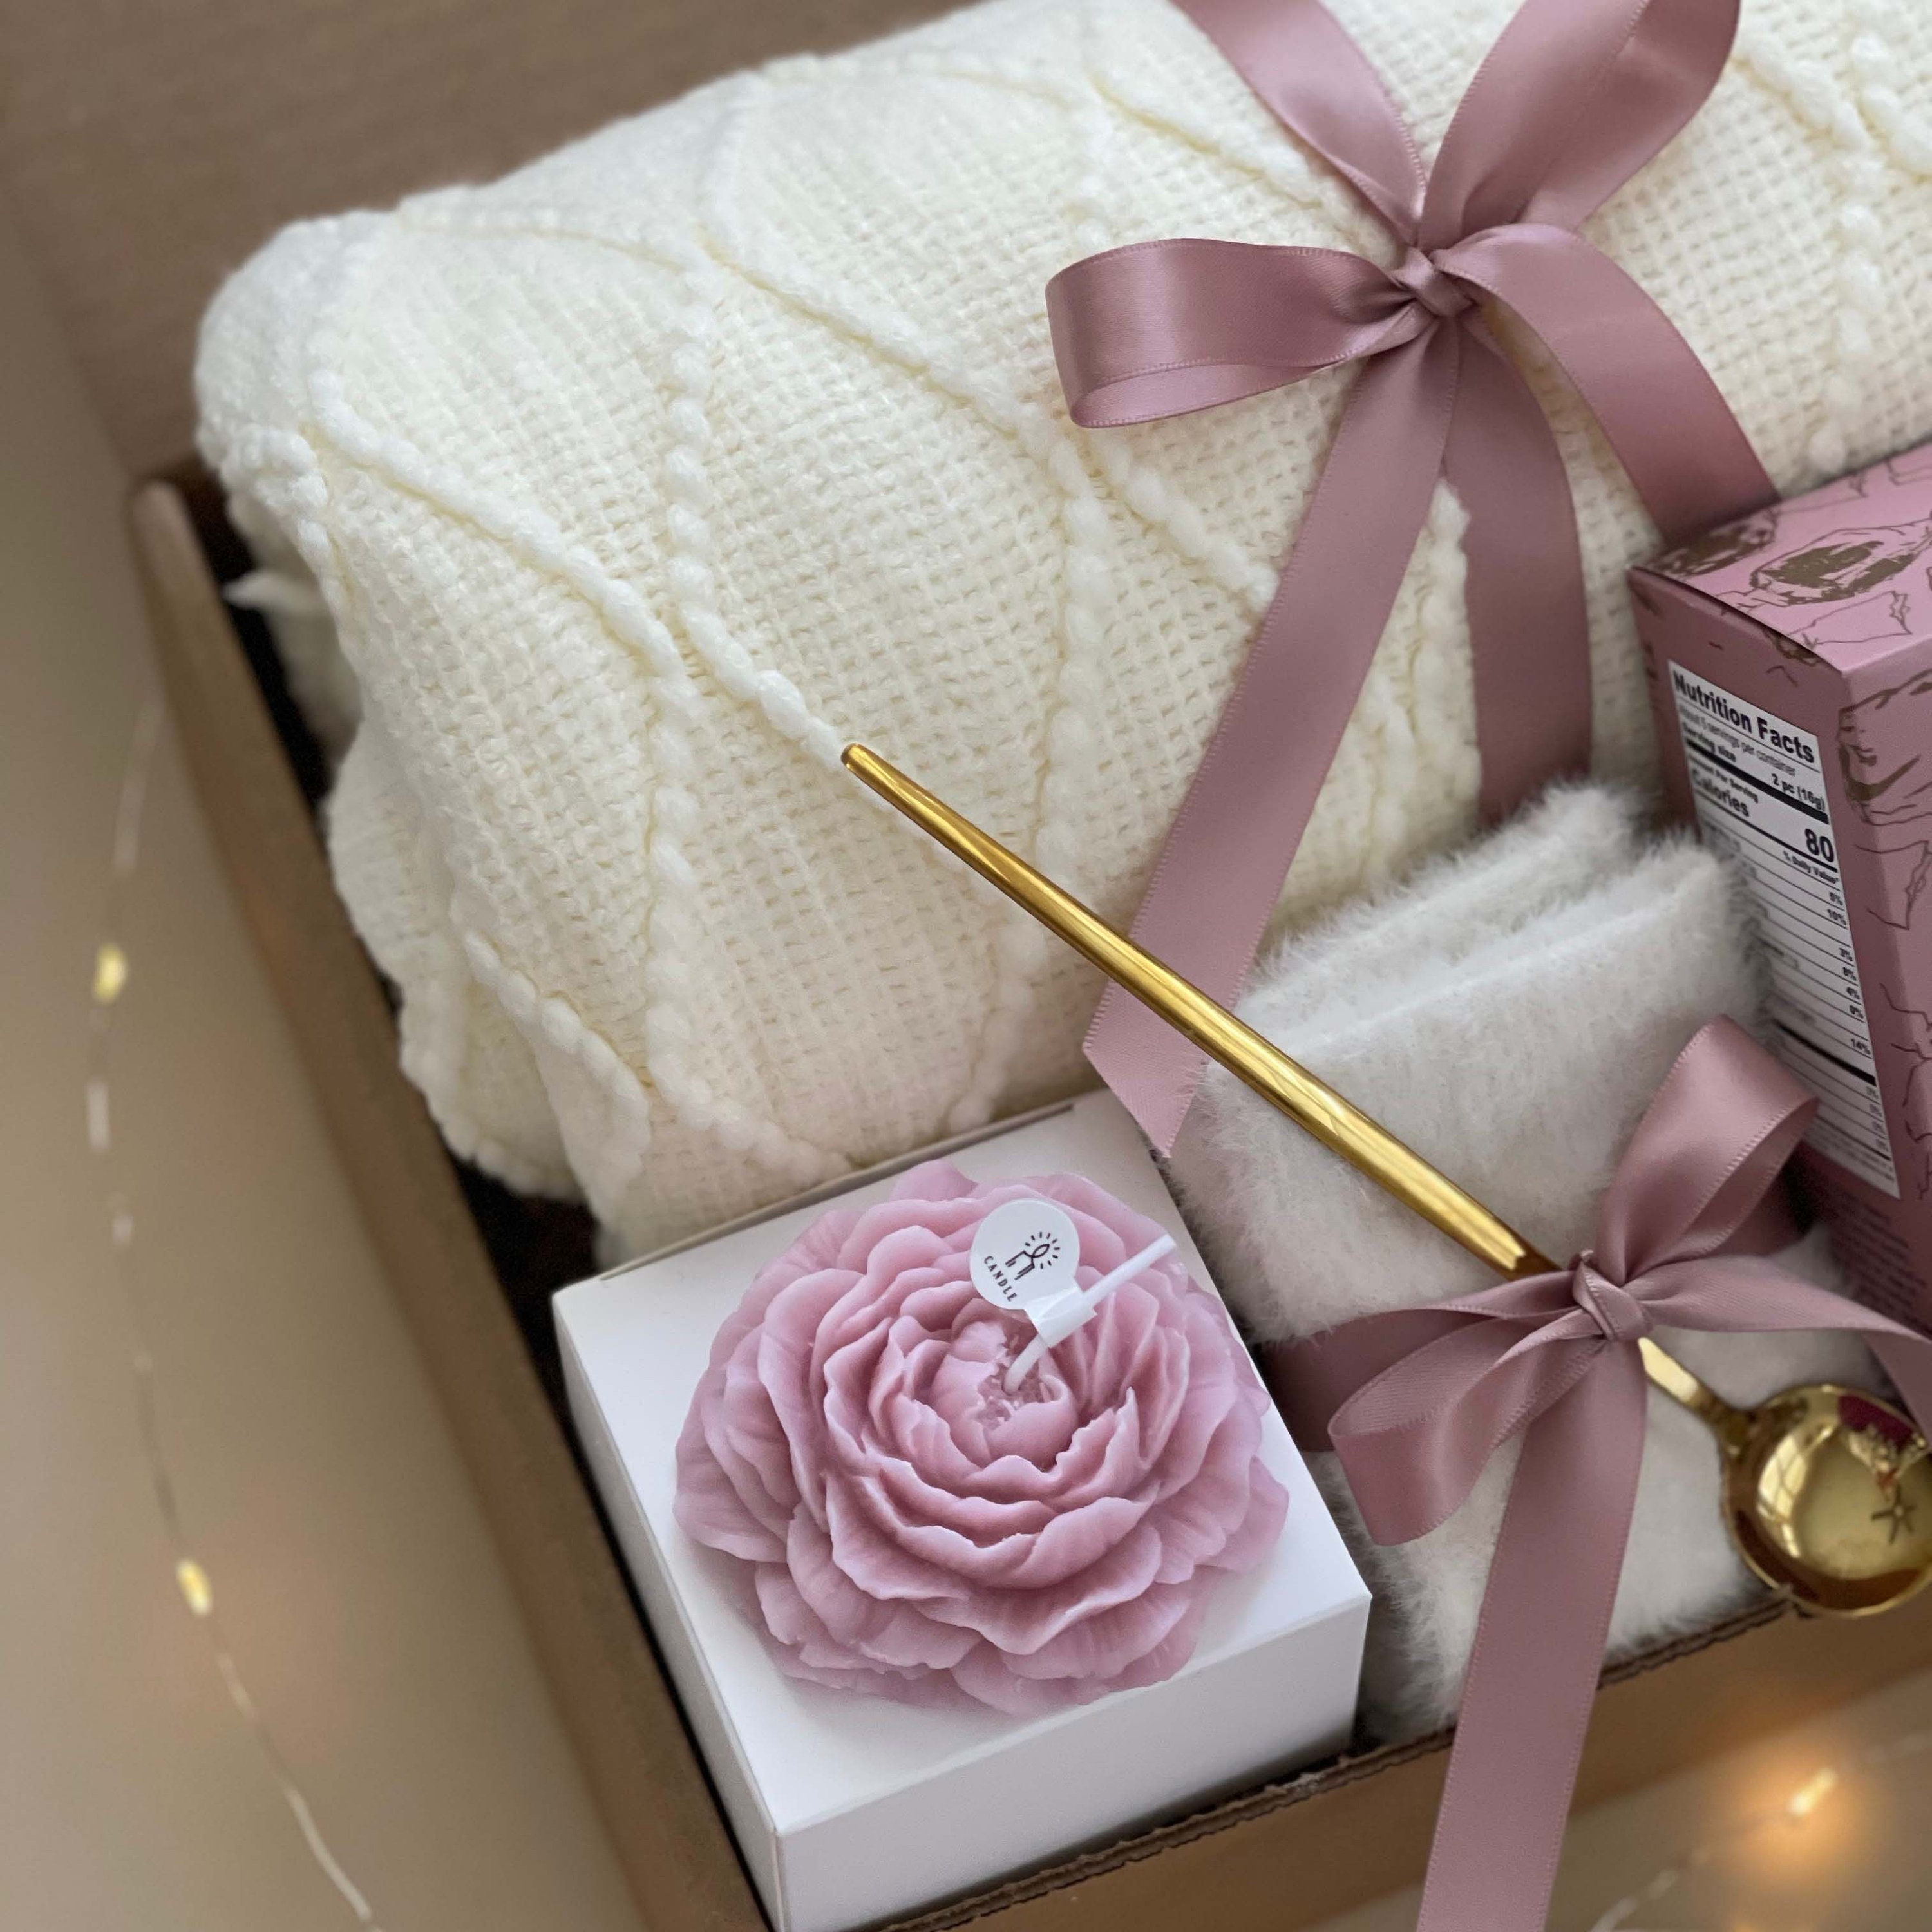 Best Gift for Women, Get Well Gifts With Blanket & Socks, Care